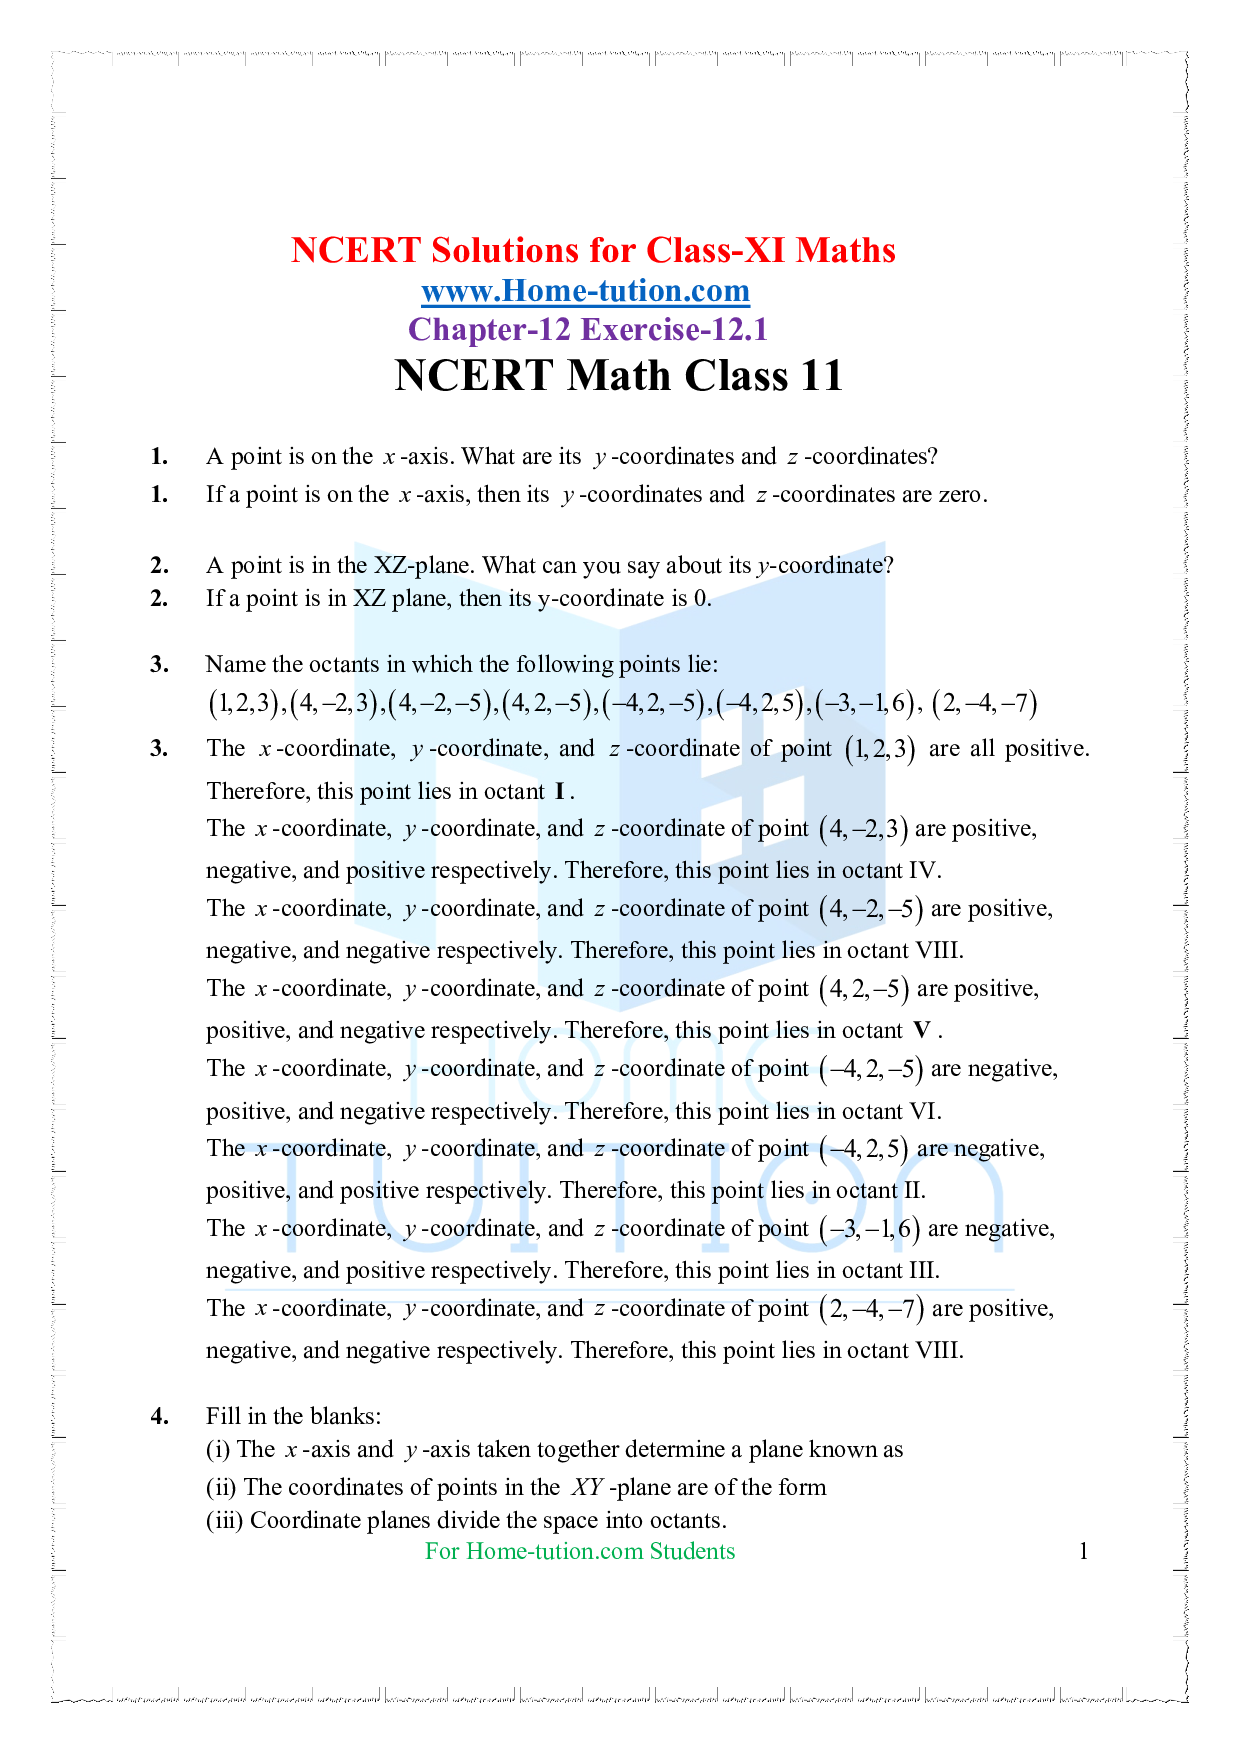 Chapter 12 Introduction to Three-Dimensional Geometry